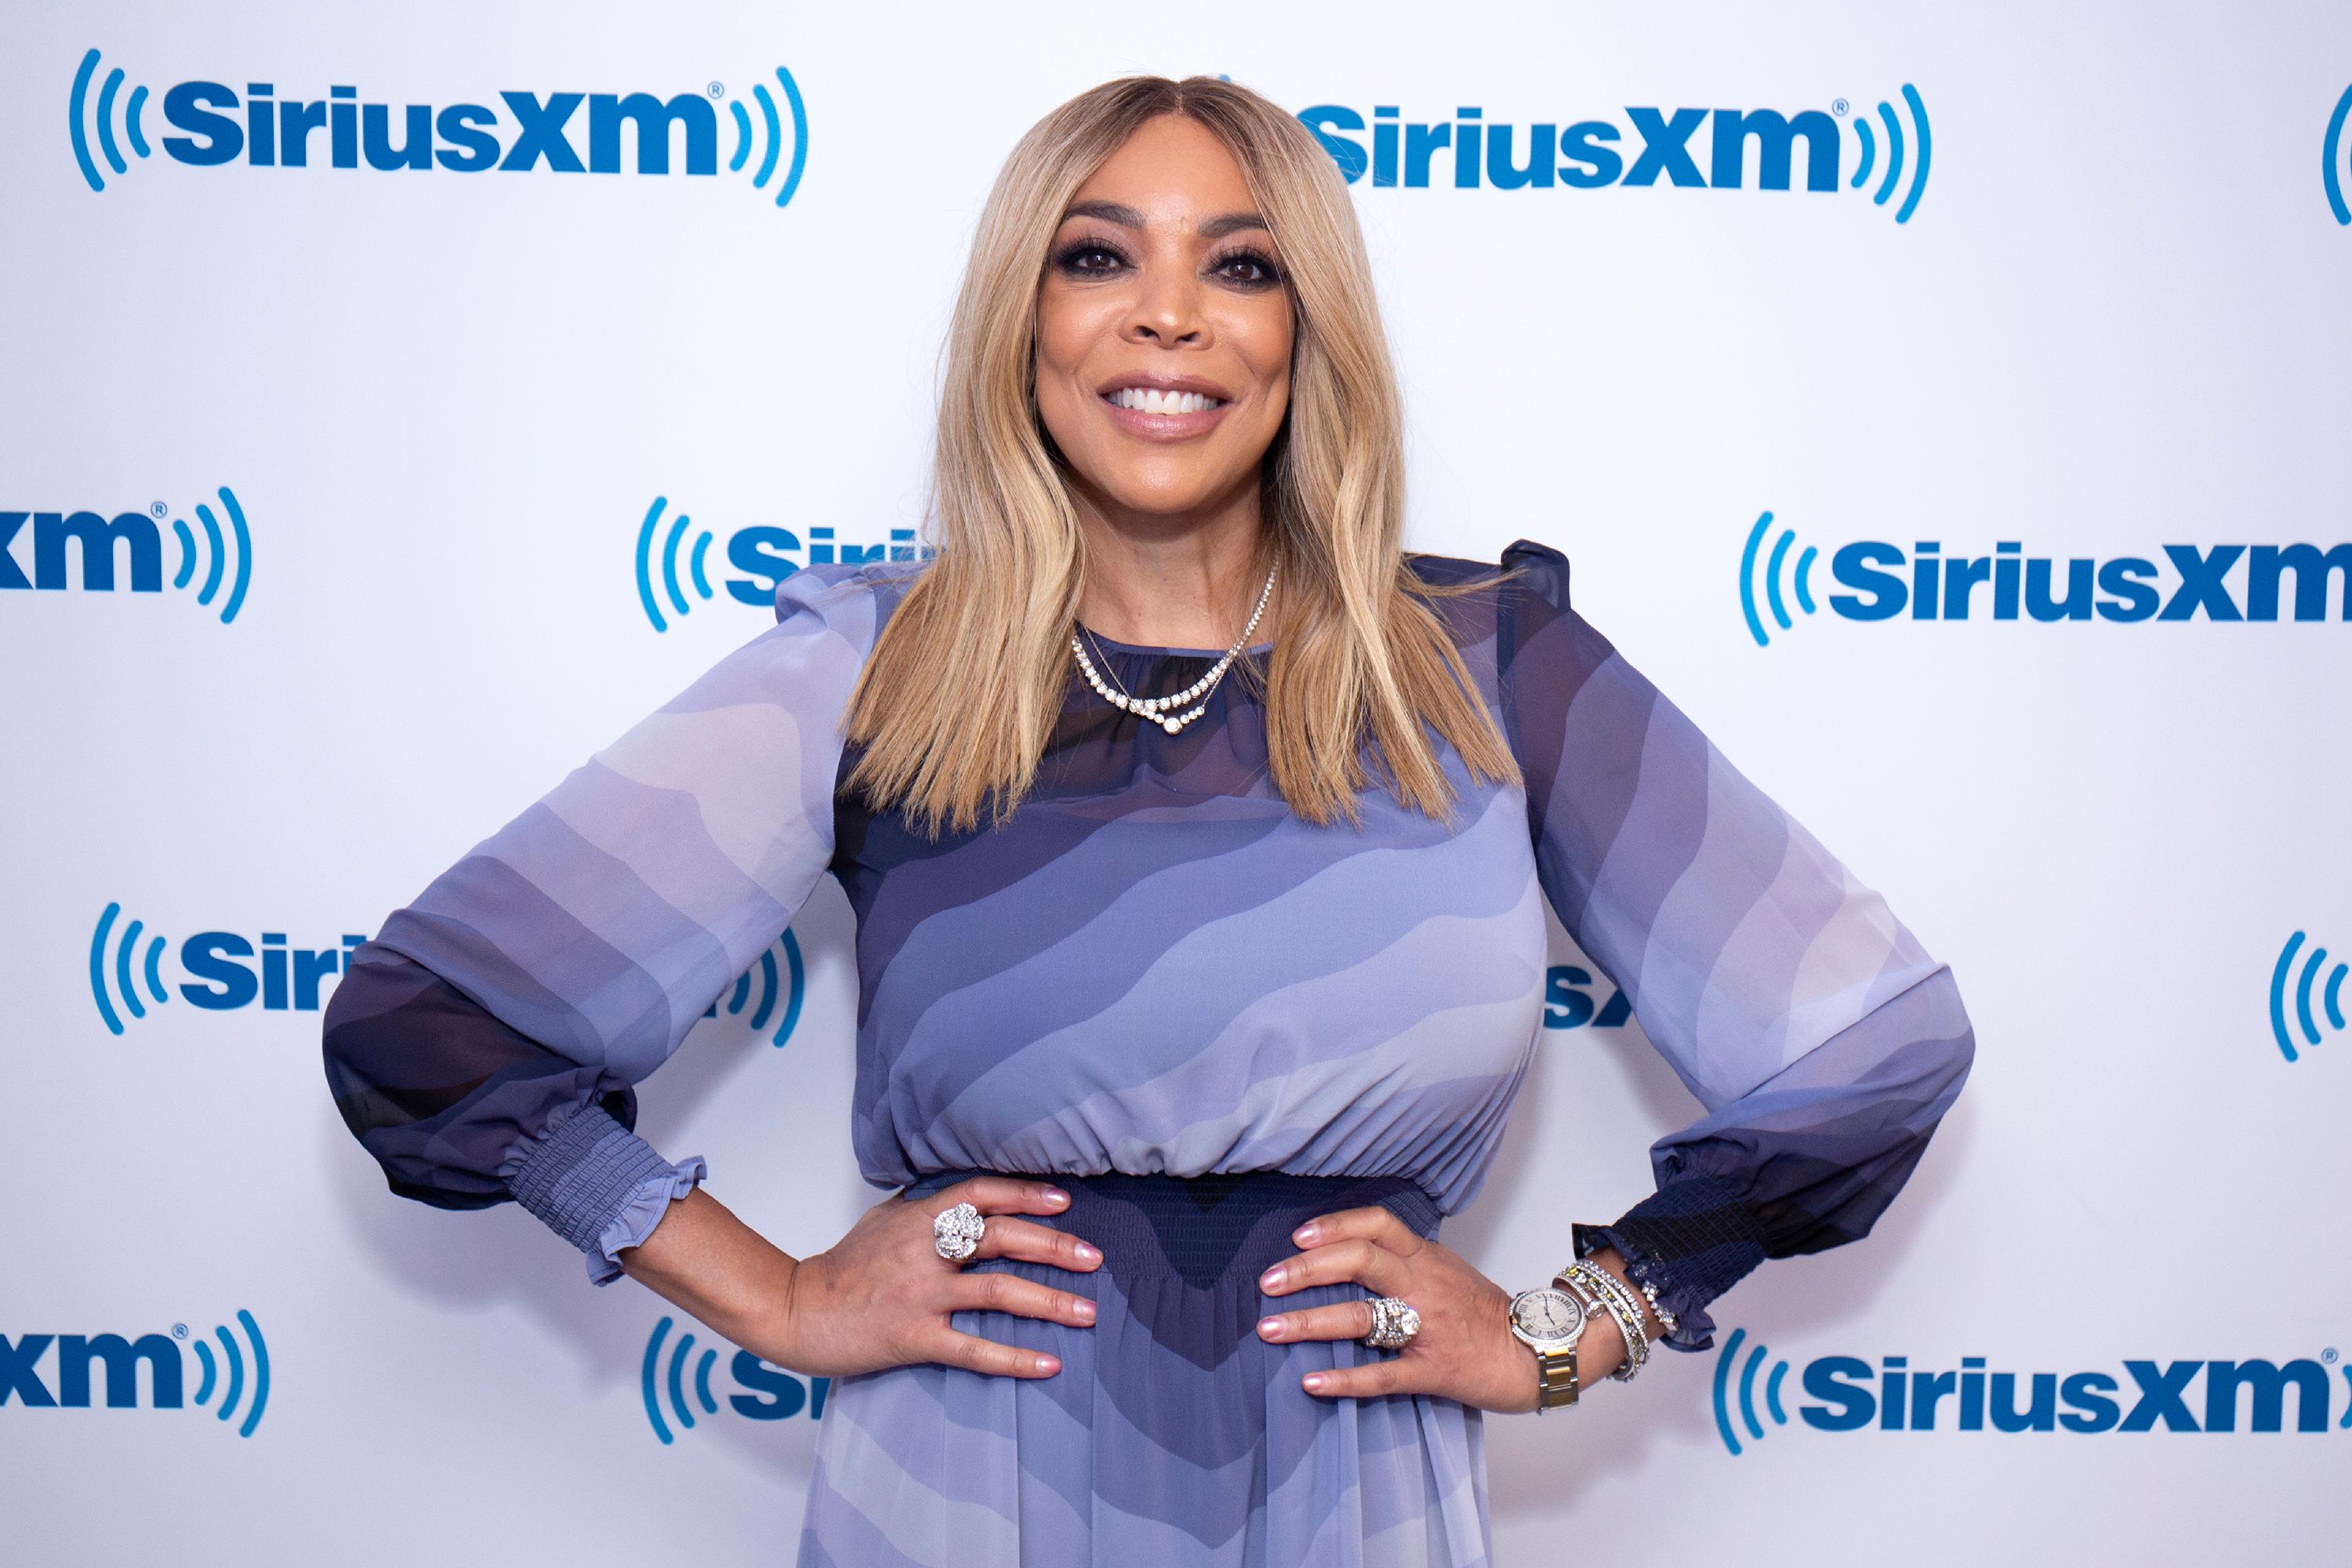 Fans Demand Apology From Wendy Williams After She Mocks Joaquin Phoenix’s Cleft Palate